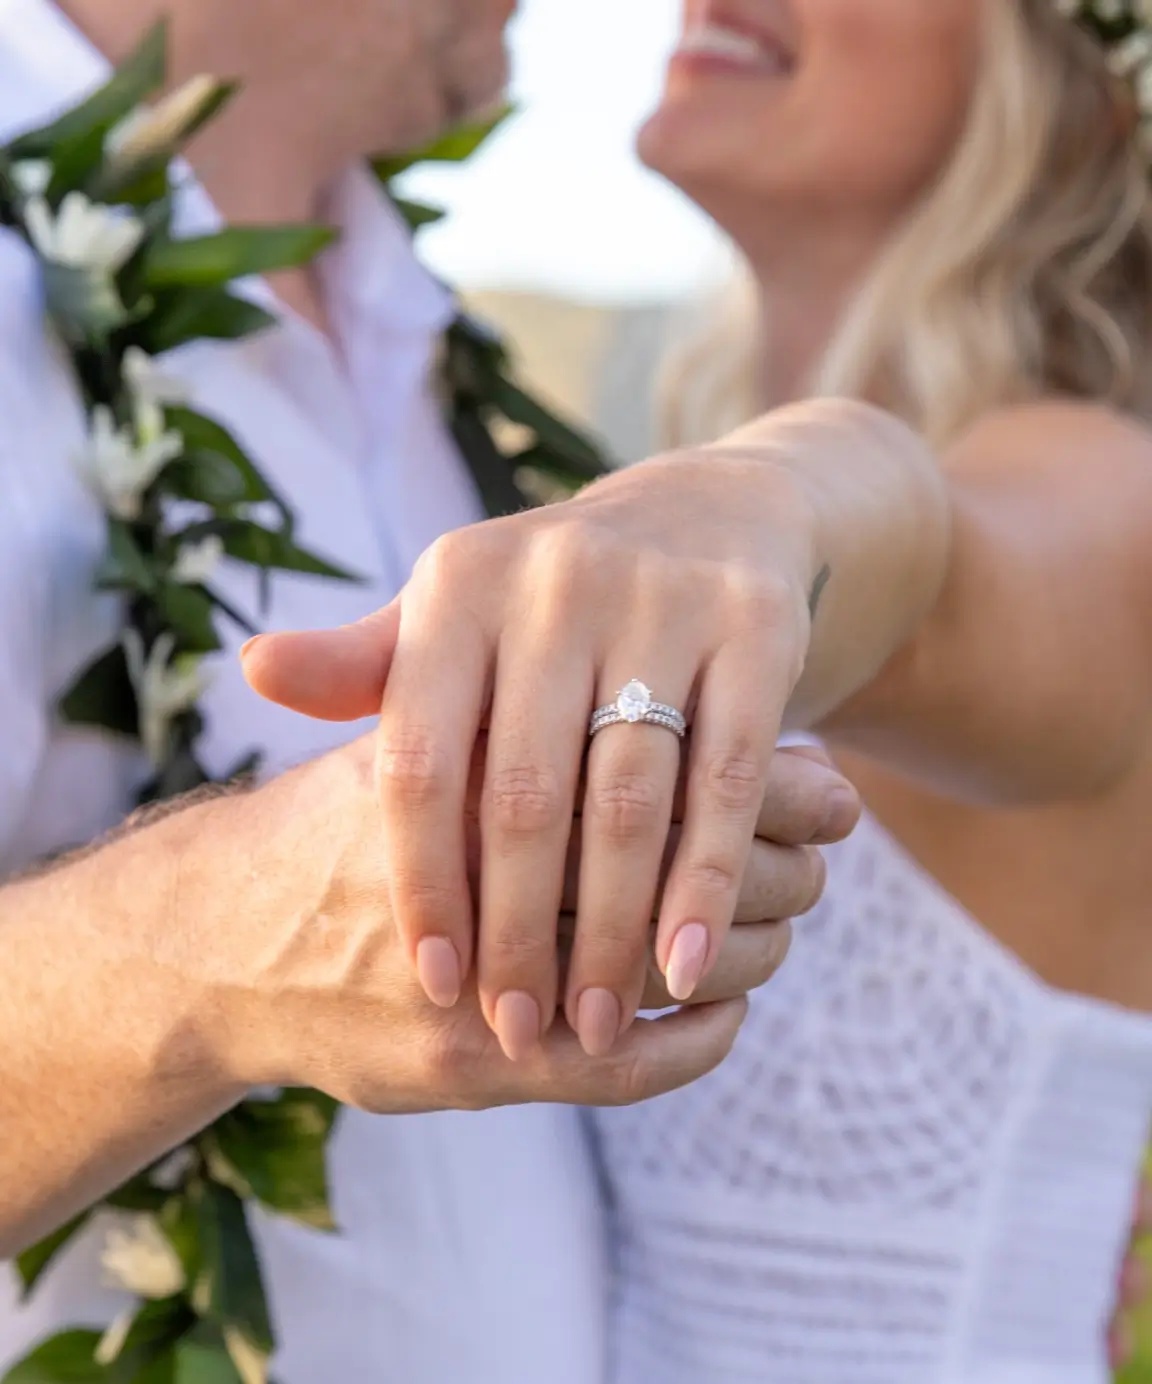 Engagement Rings Vs Wedding Rings - How Are They Different?